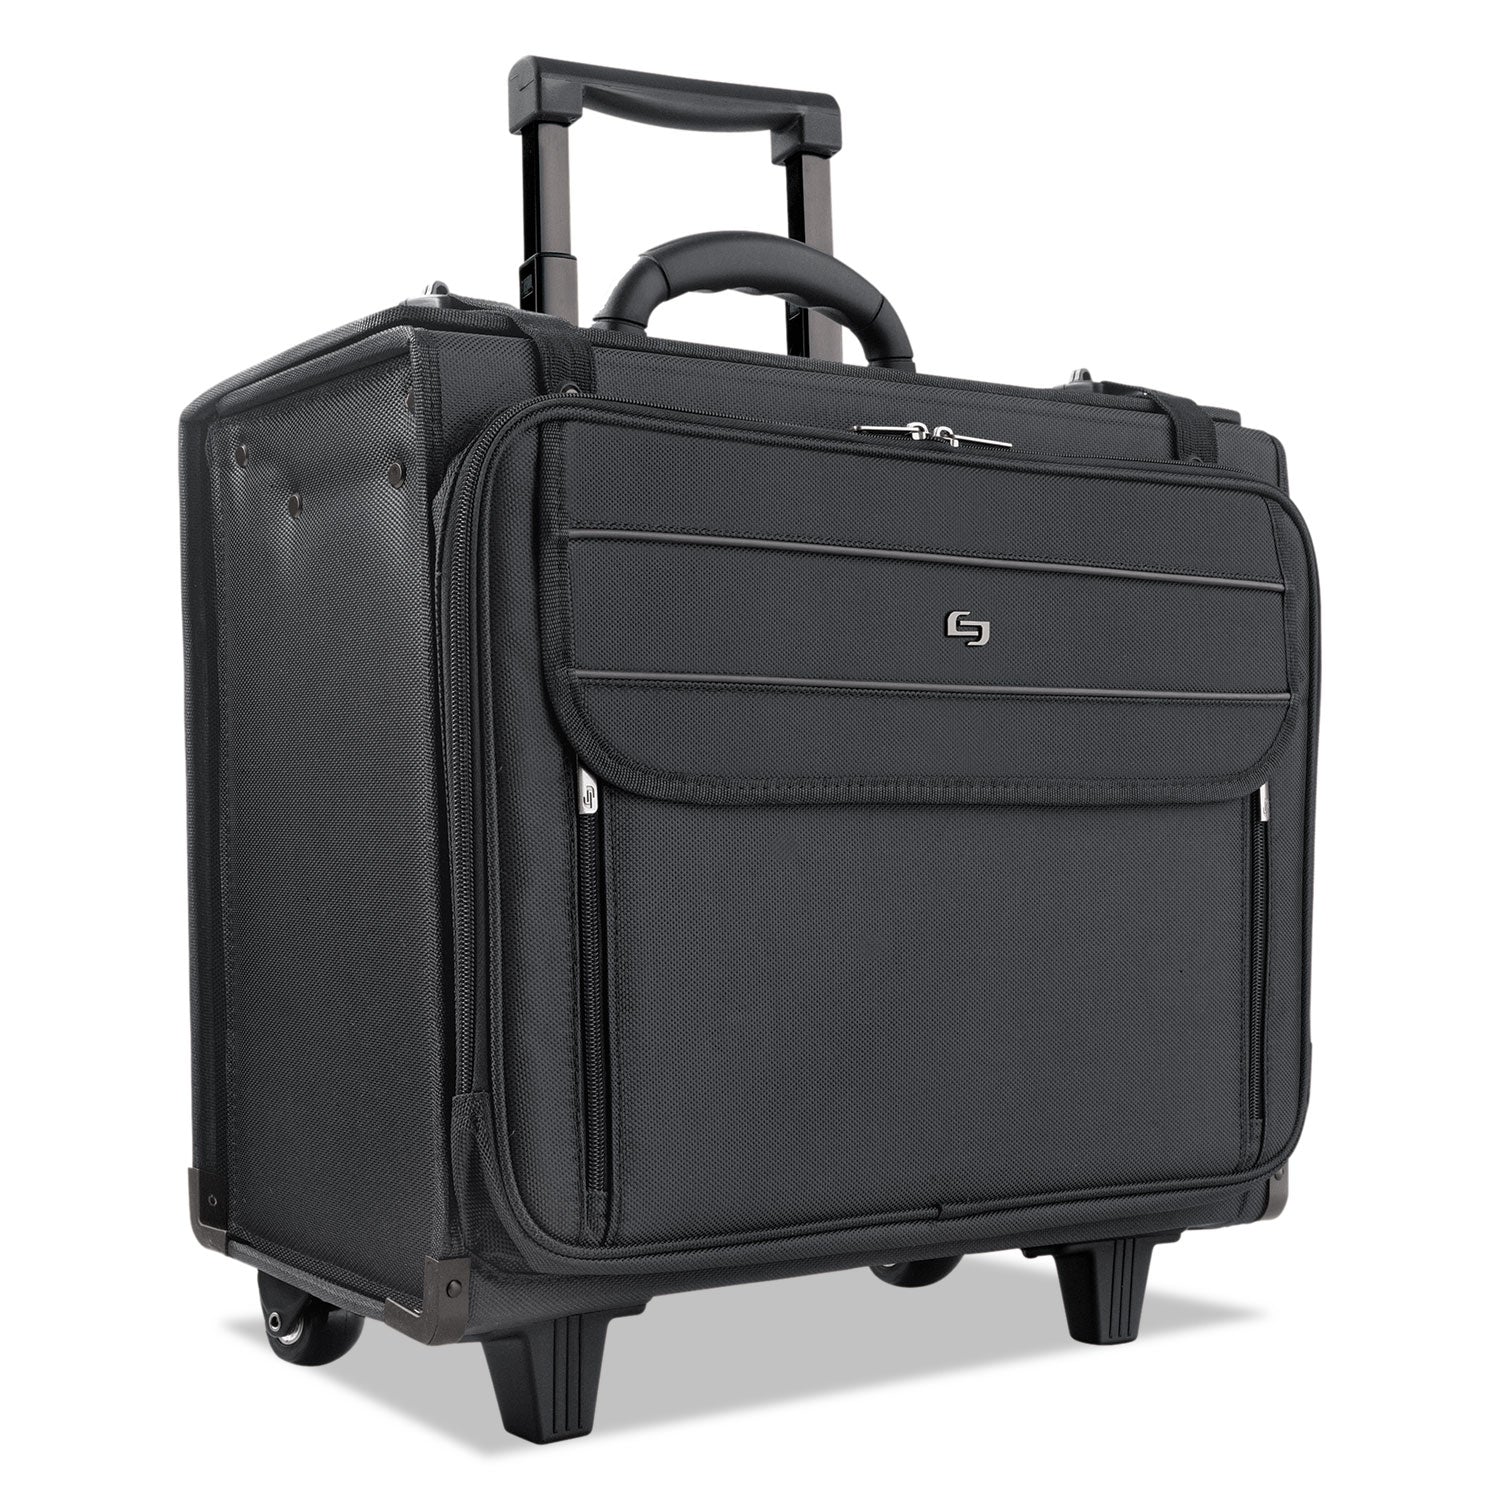 Classic Rolling Catalog Case, Fits Devices Up to 17.3", Polyester, 18 x 7 x 14, Black - 